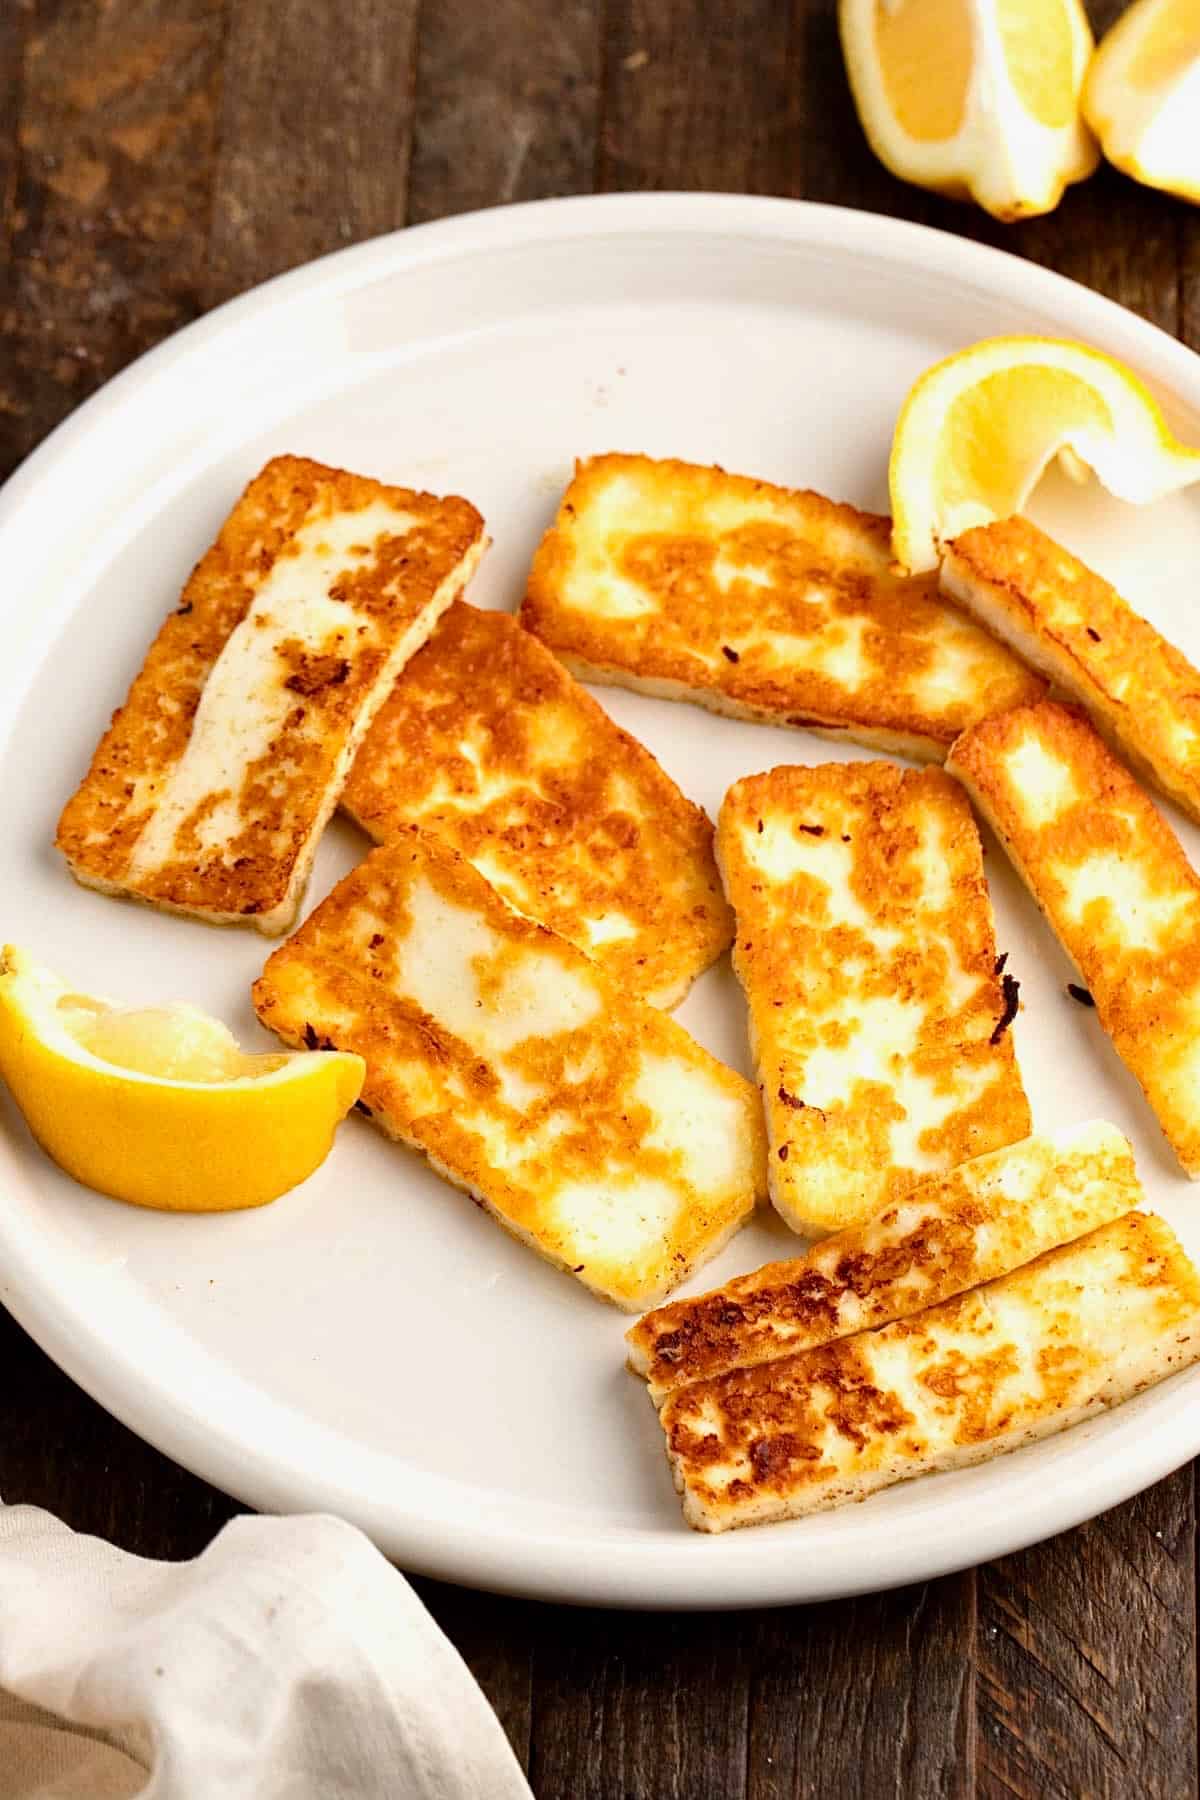 How to cook perfectly Halloumi cheese